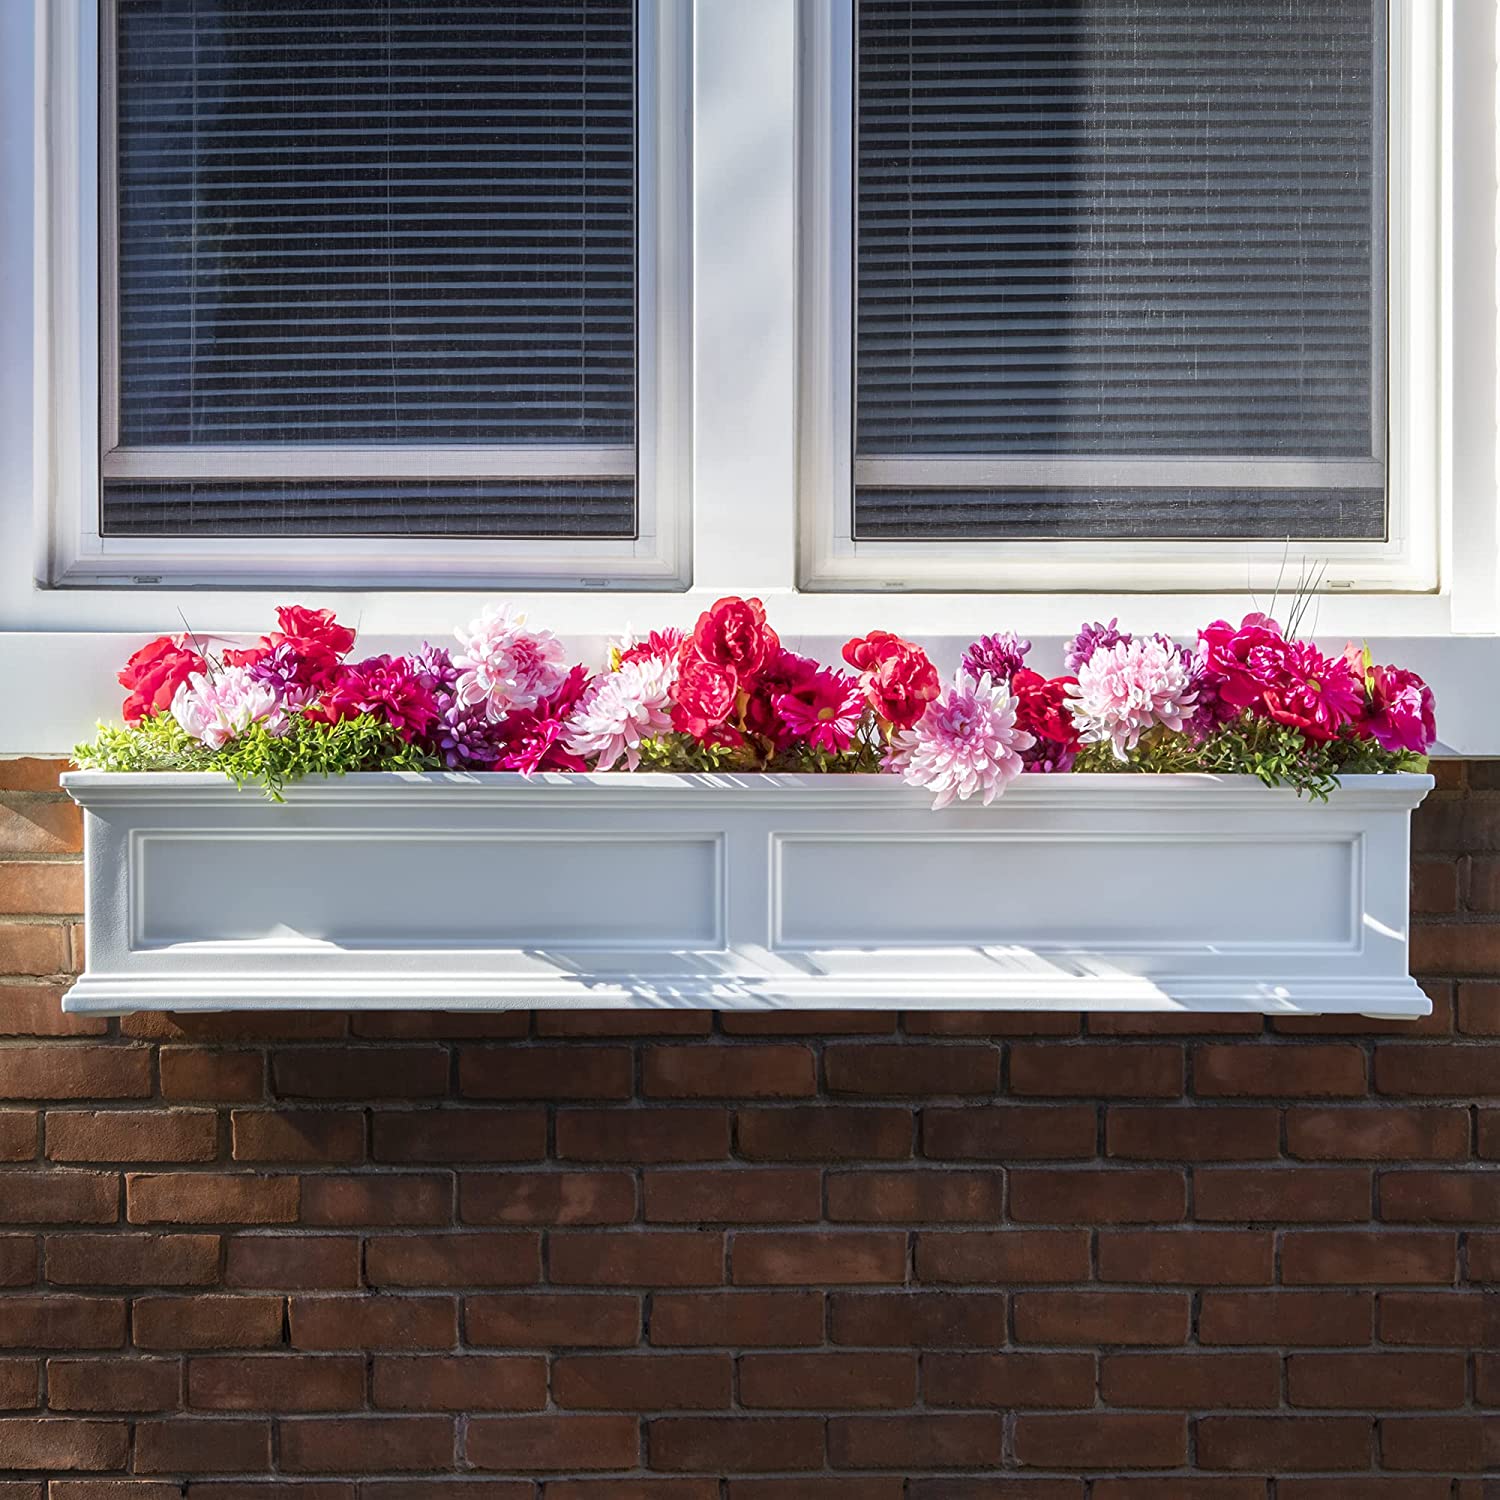 How To Make Window Flower Boxes